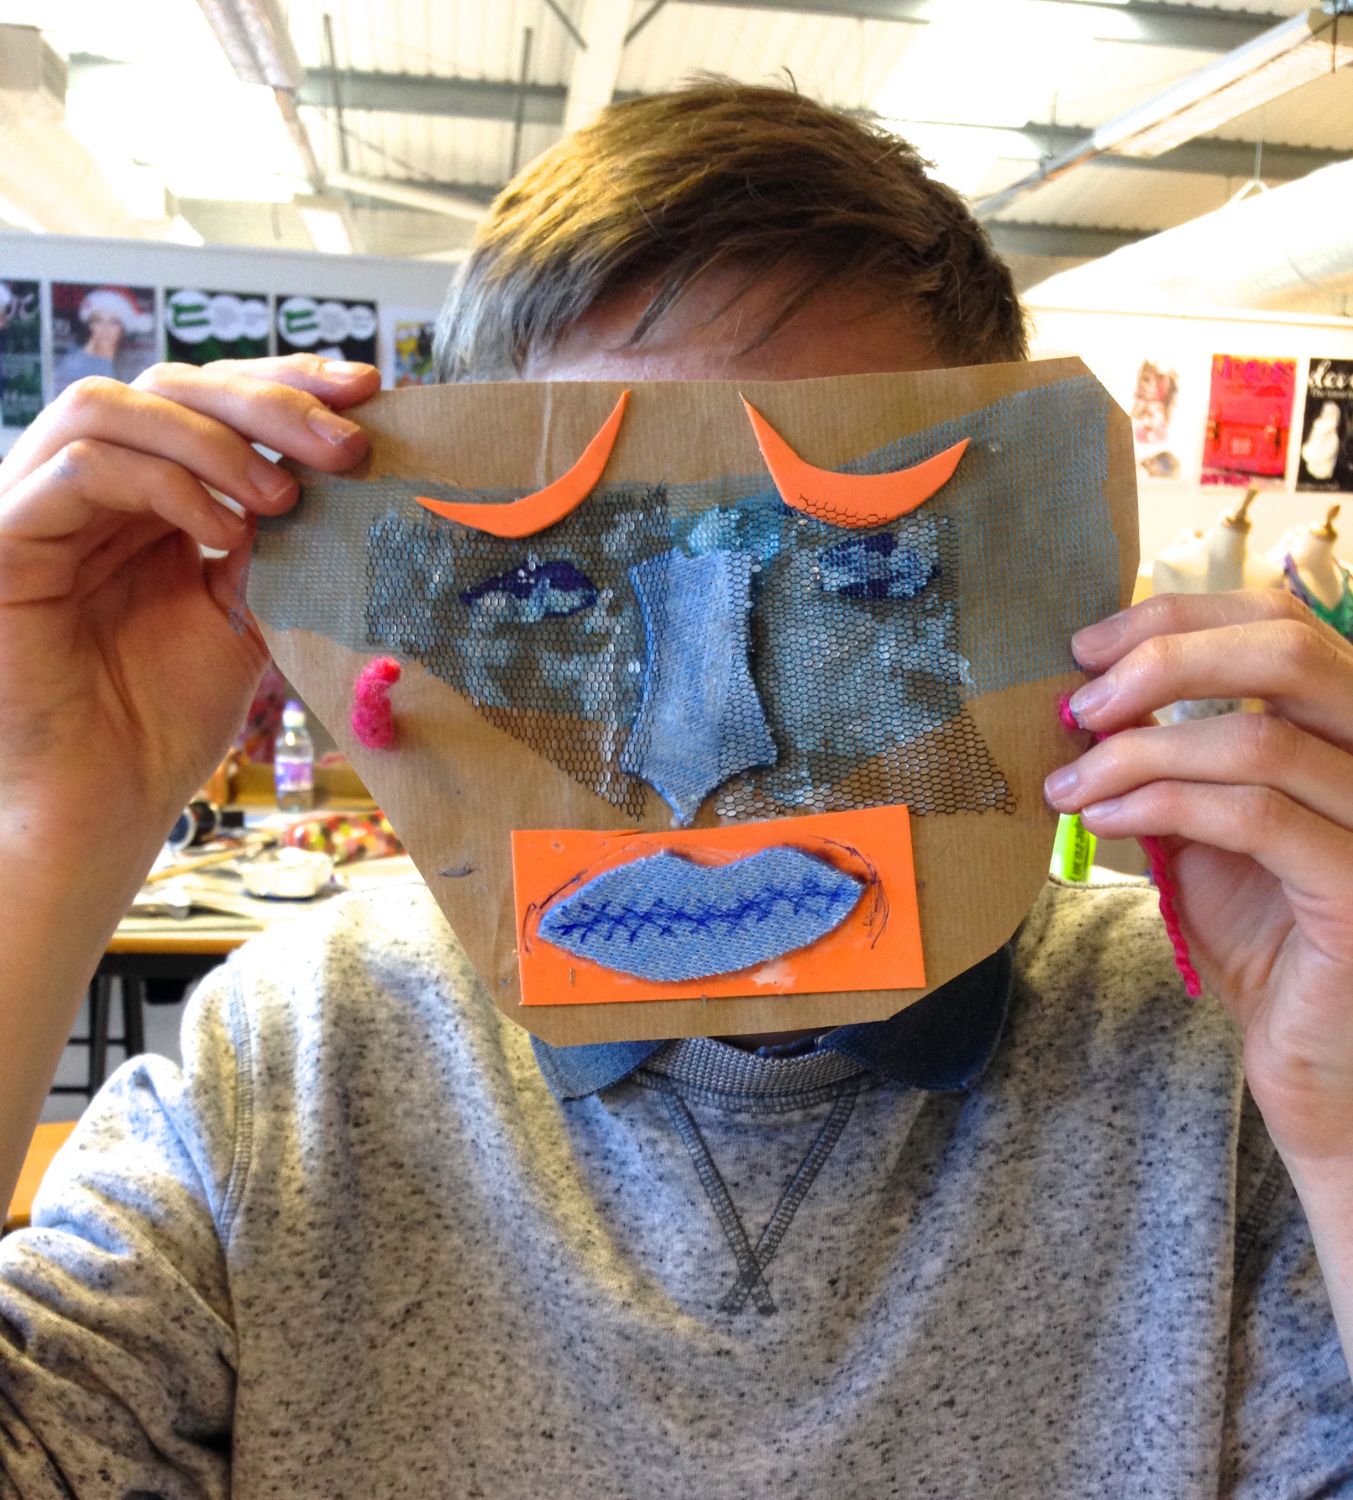 maskmaking - Seevic college